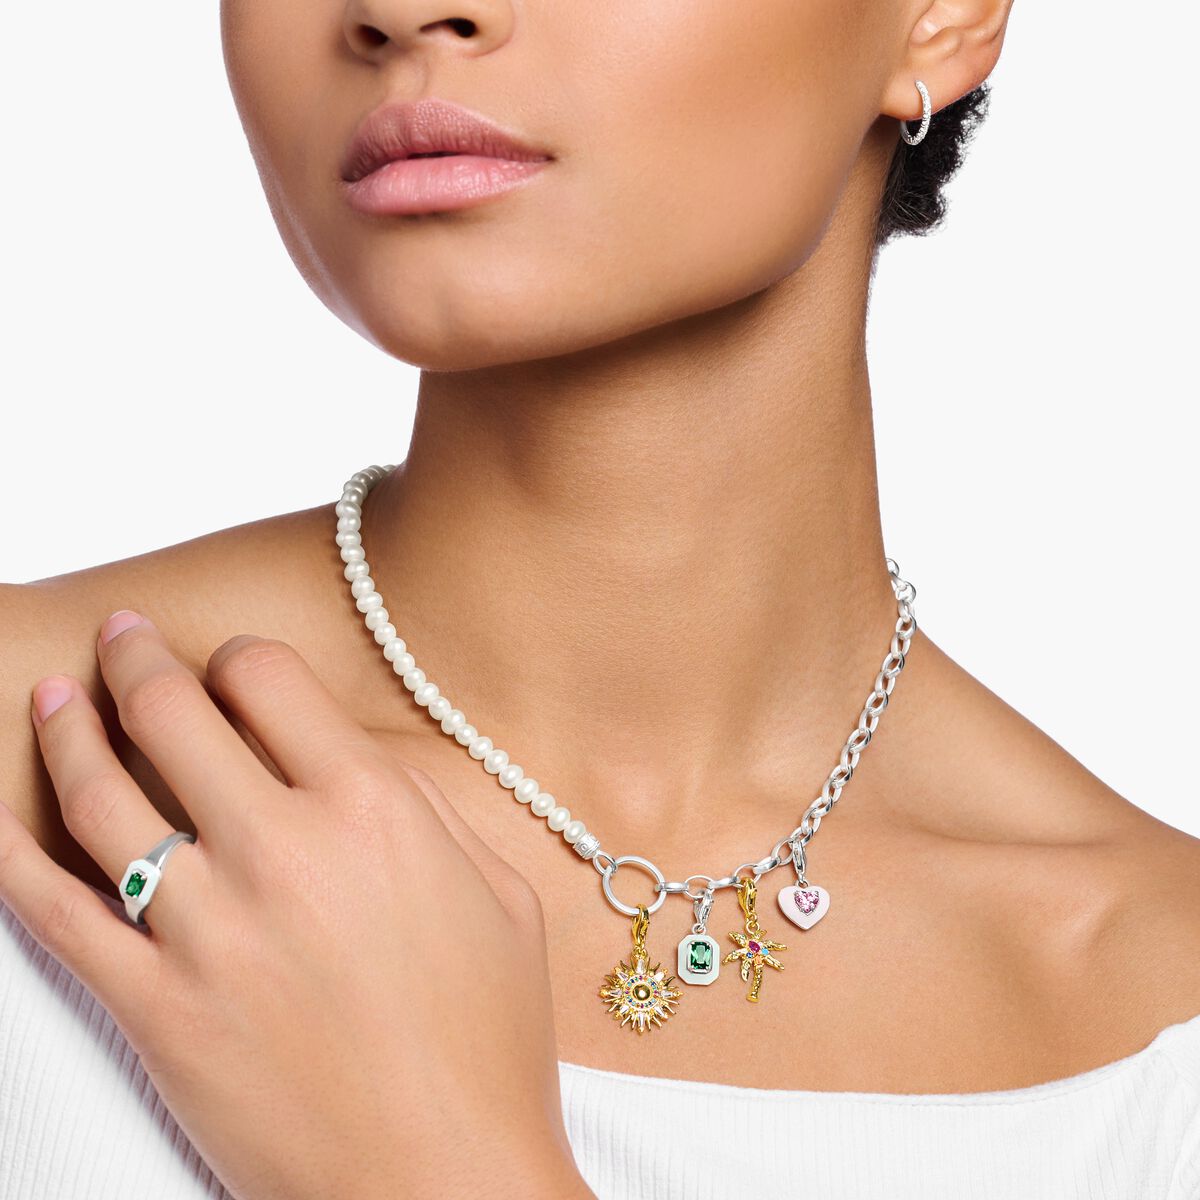 Charm necklace, freshwater pearls & silver | THOMAS SABO